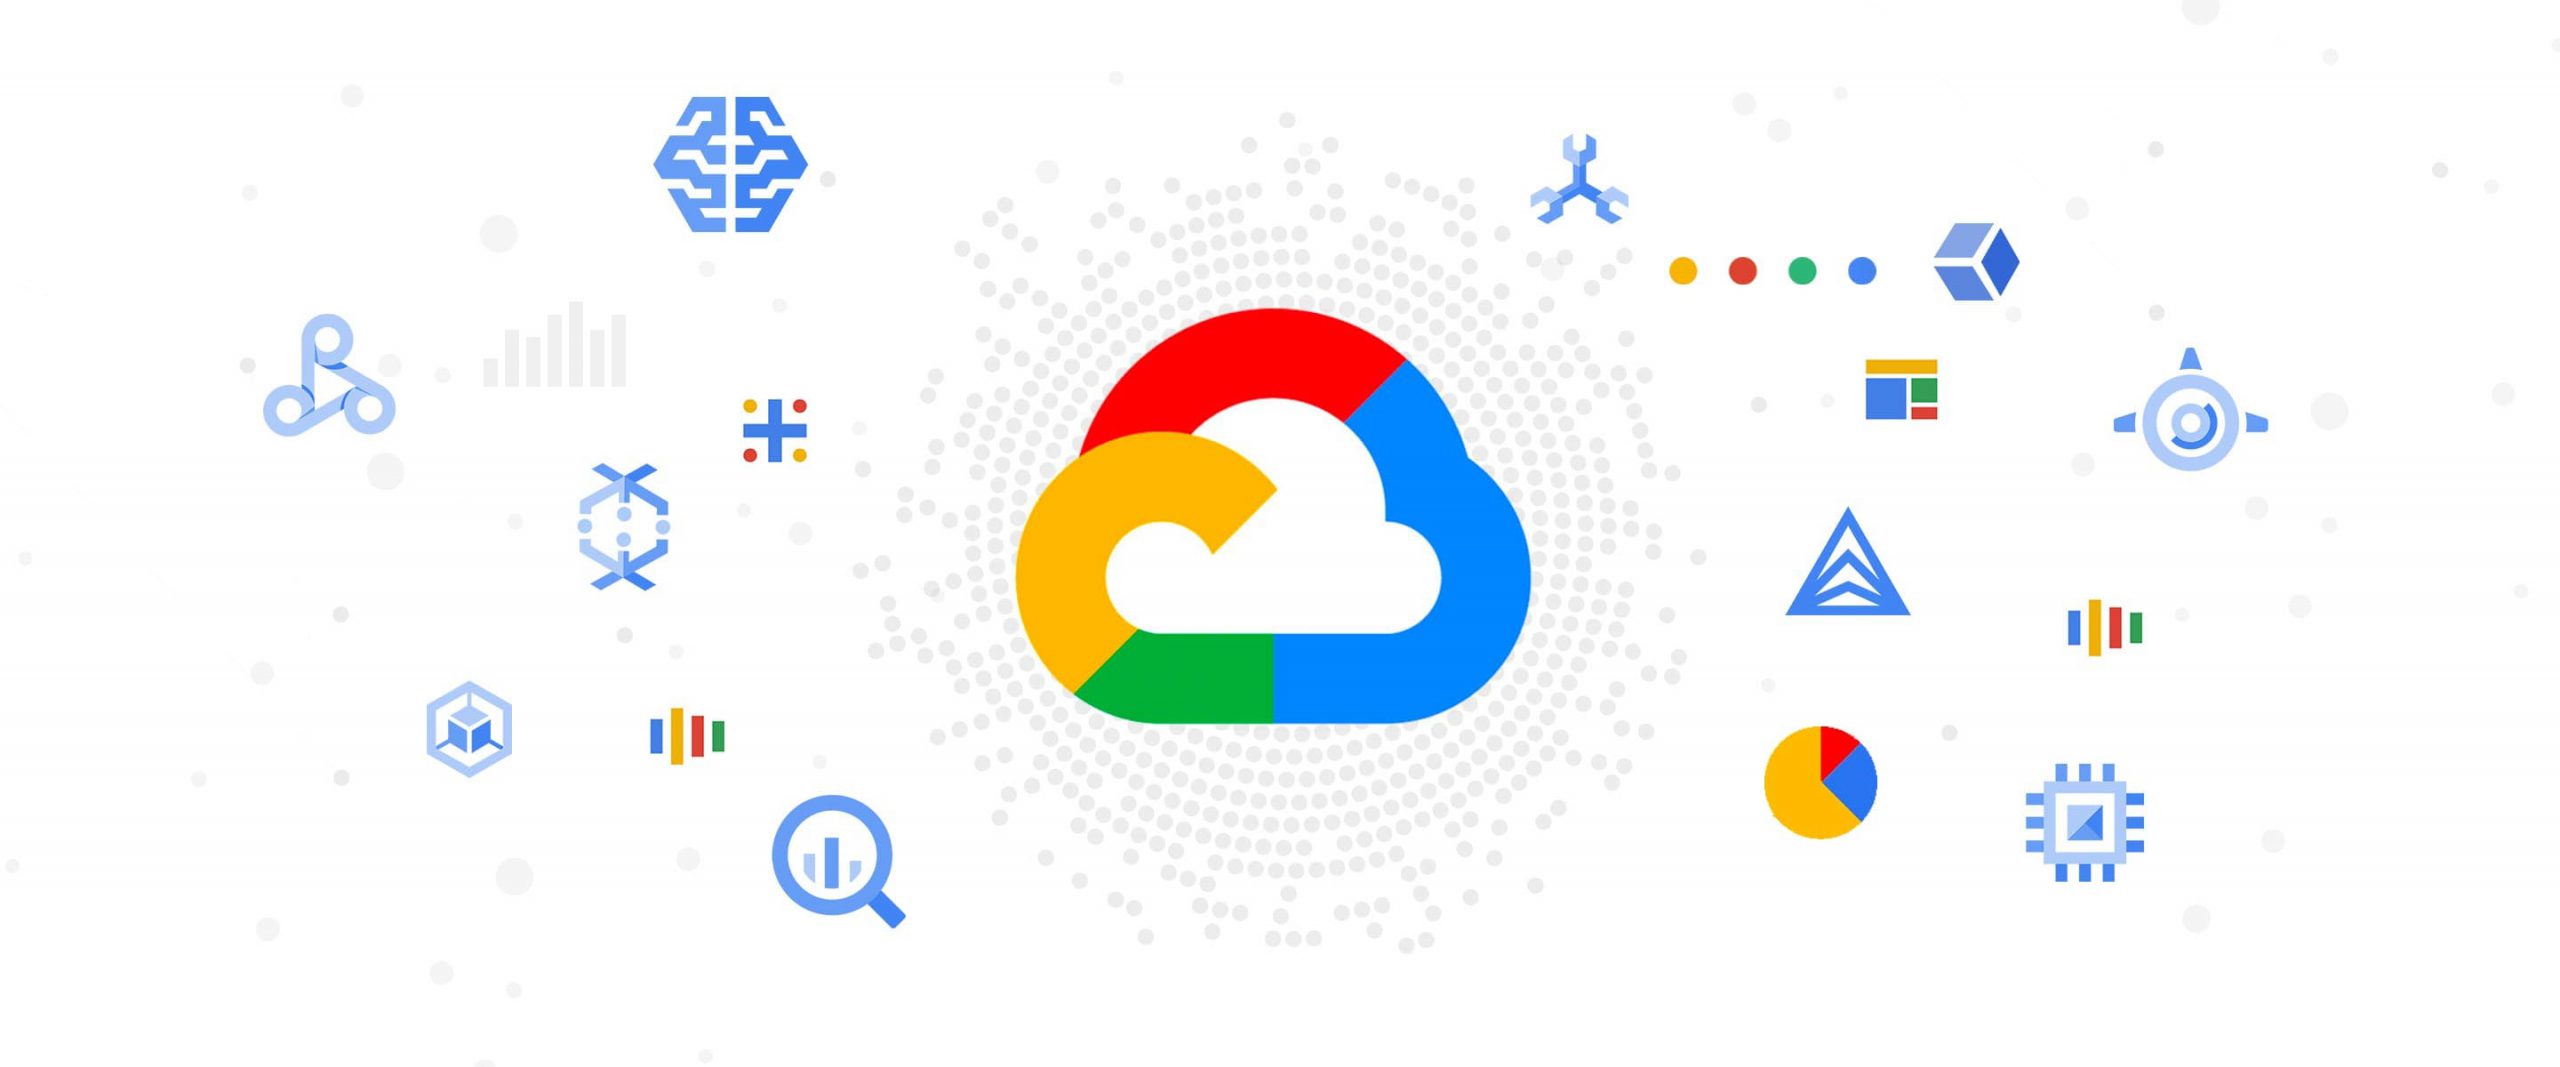 Google cloud platform services and product's overview